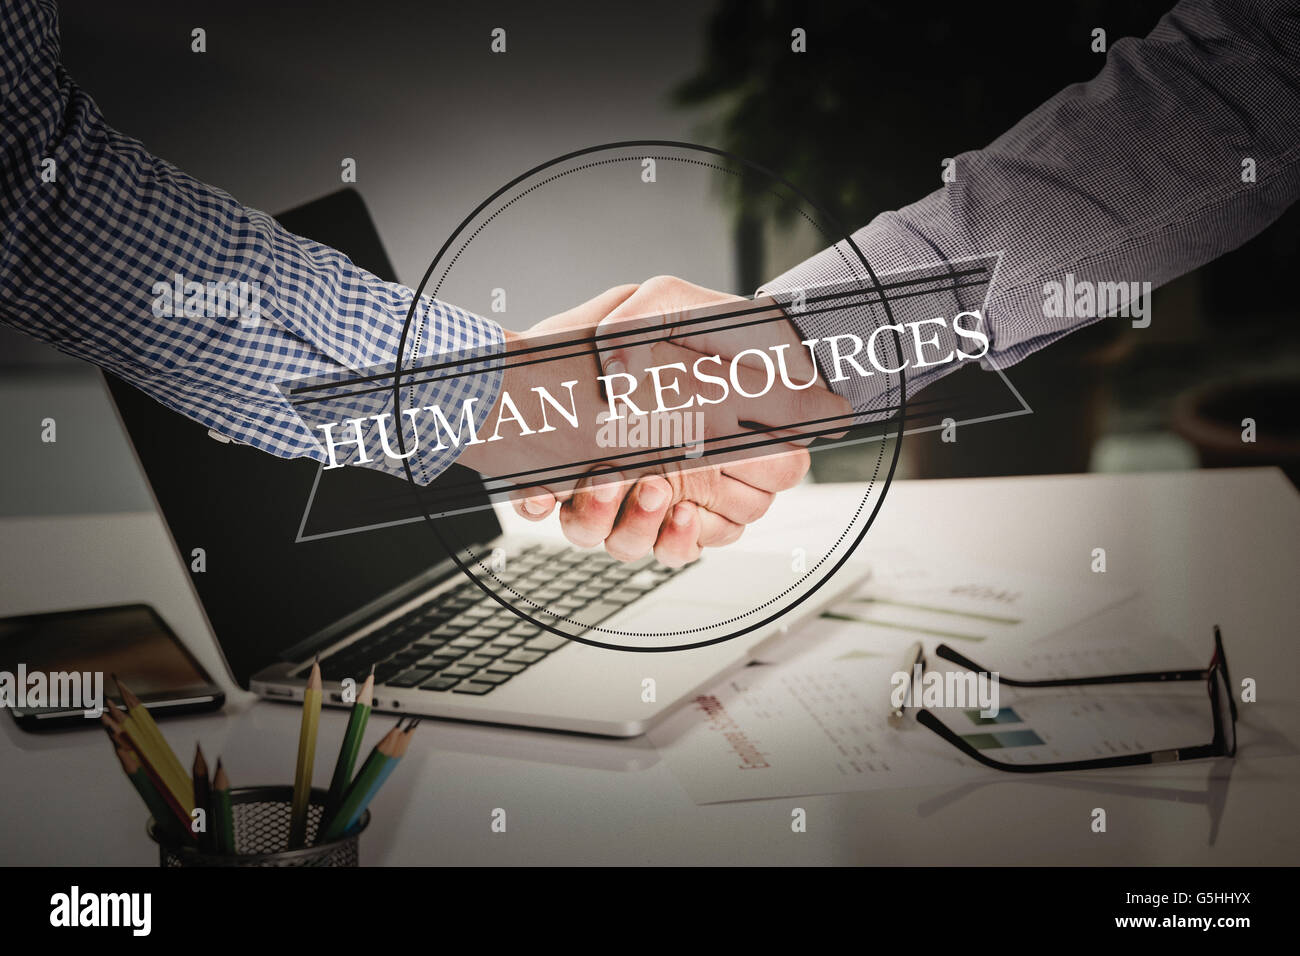 BUSINESS AGREEMENT PARTNERSHIP Human Resources COMMUNICATION CONCEPT Stock Photo